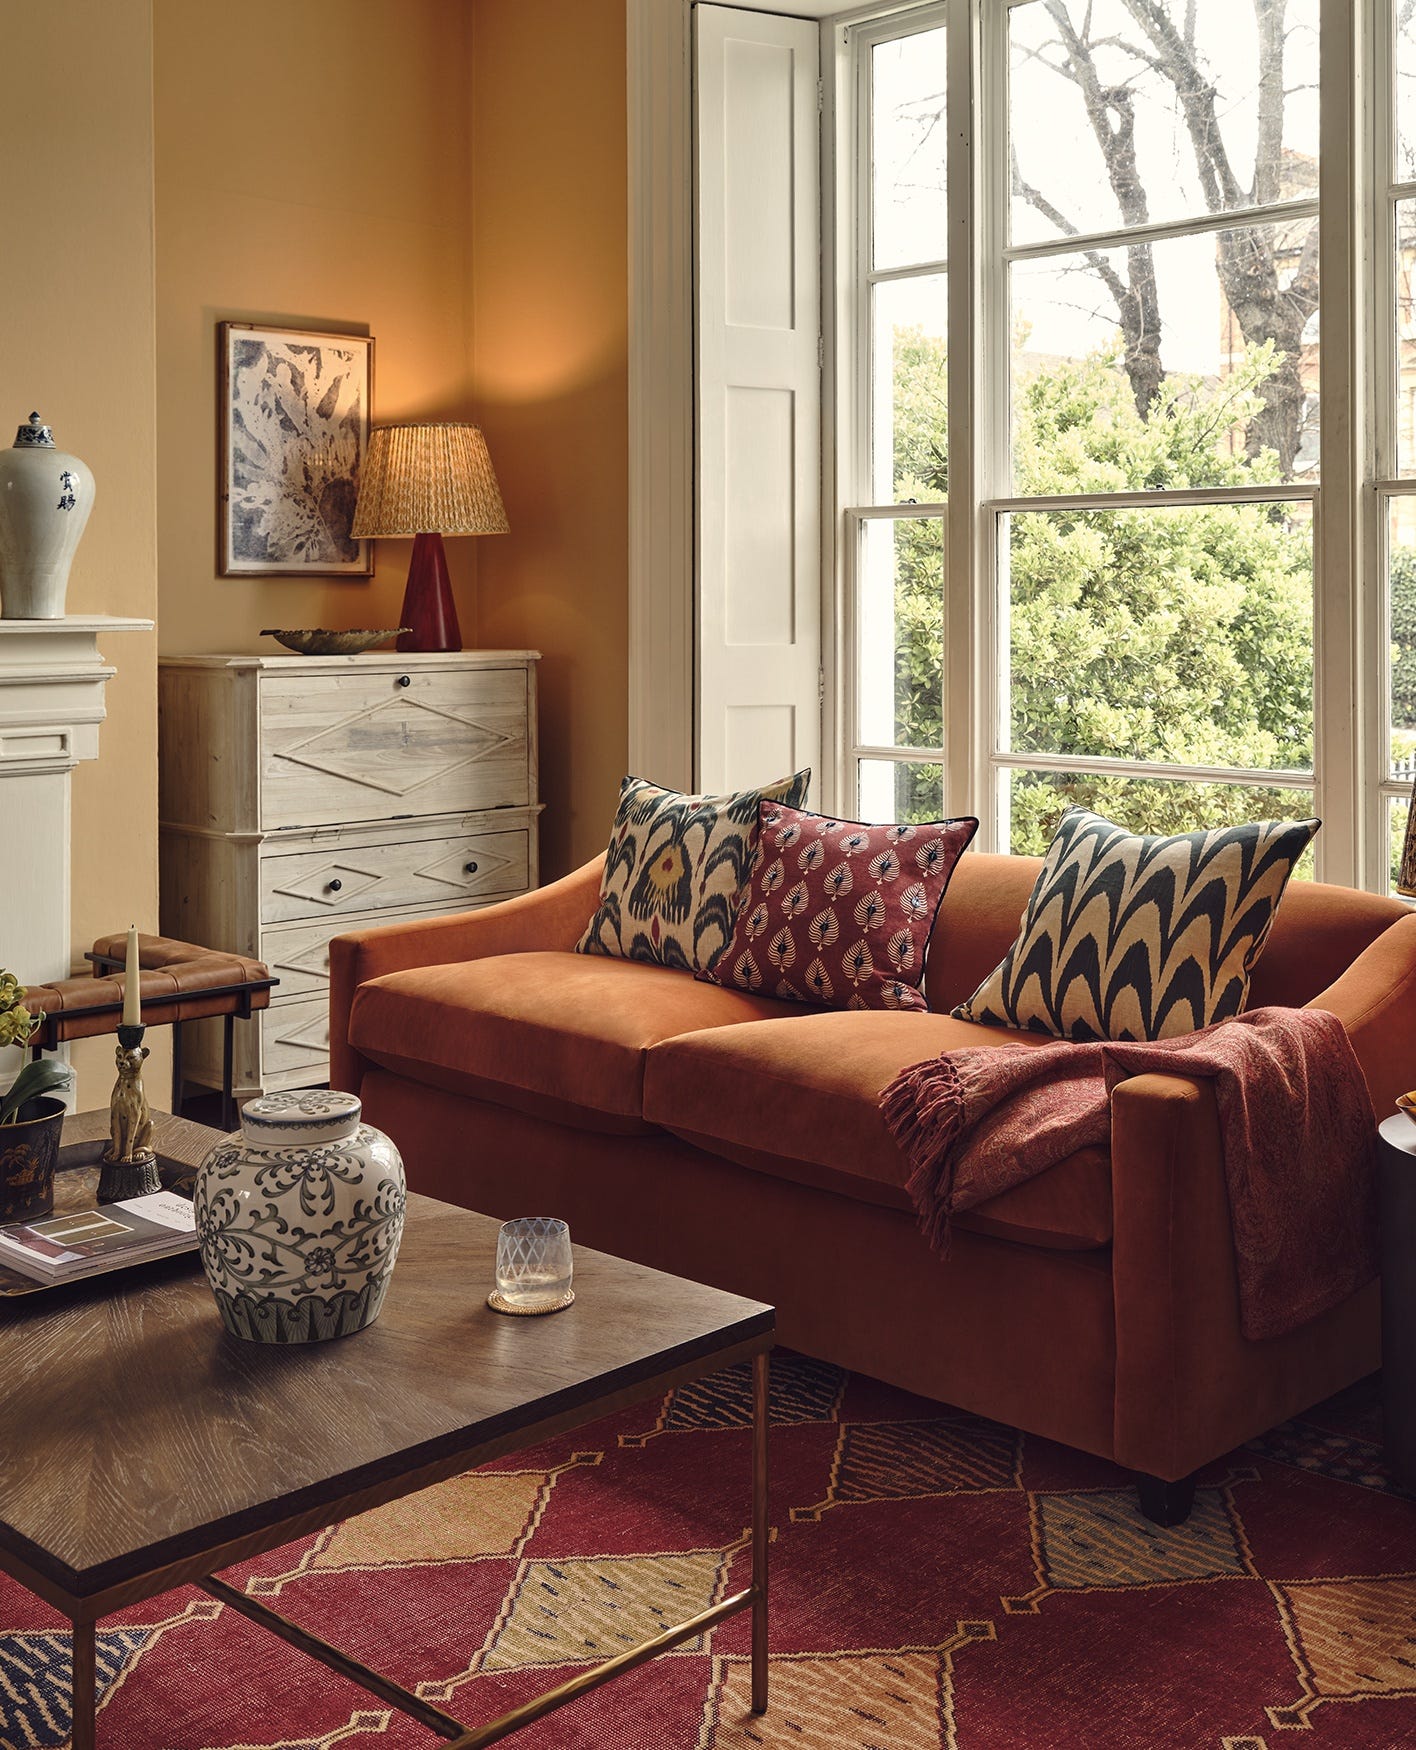 A cosy sitting room featuring an orange autumn sofa and patterned cushions